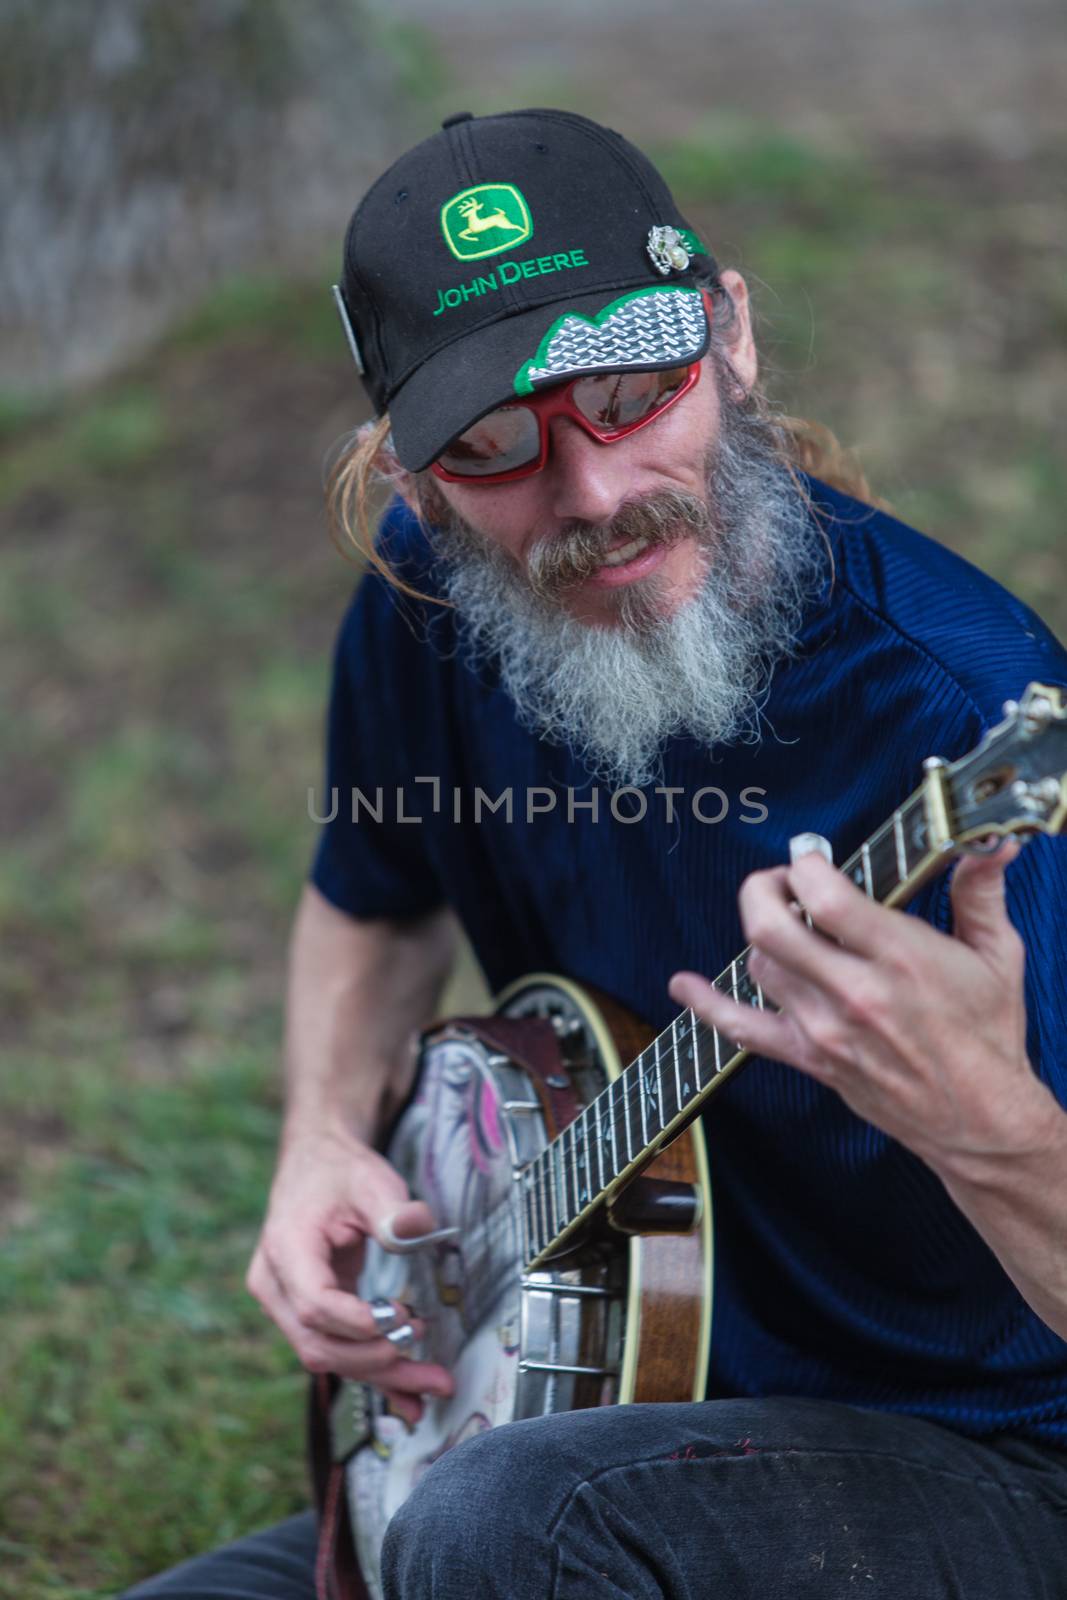 DES MOINES, IA /USA - AUGUST 10: Unidentified banjo player at the Iowa State Fair on August 10, 2014 in Des Moines, Iowa, USA.